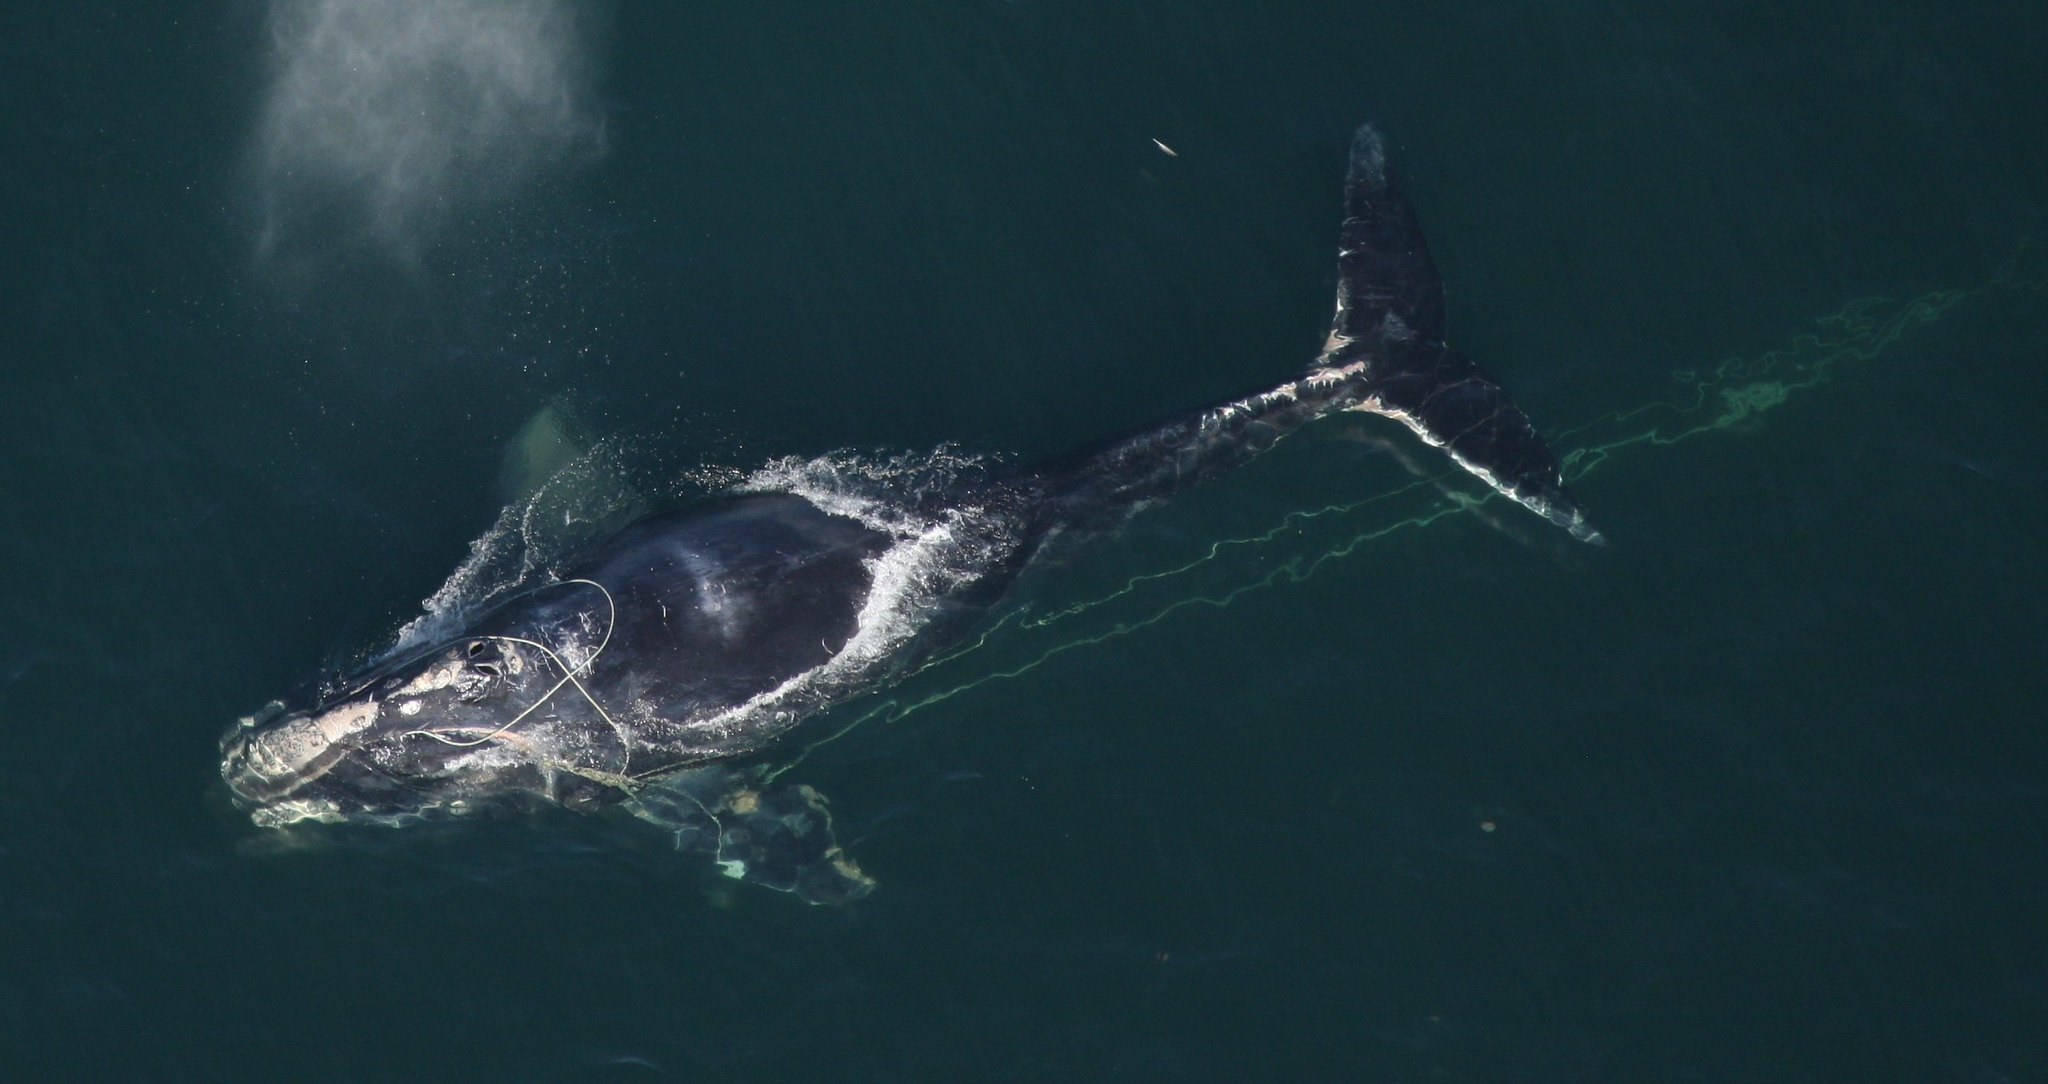 An aerial view of a North Atlantic right whale at the surface with fishing line tangled around it's head and dragging behind it.